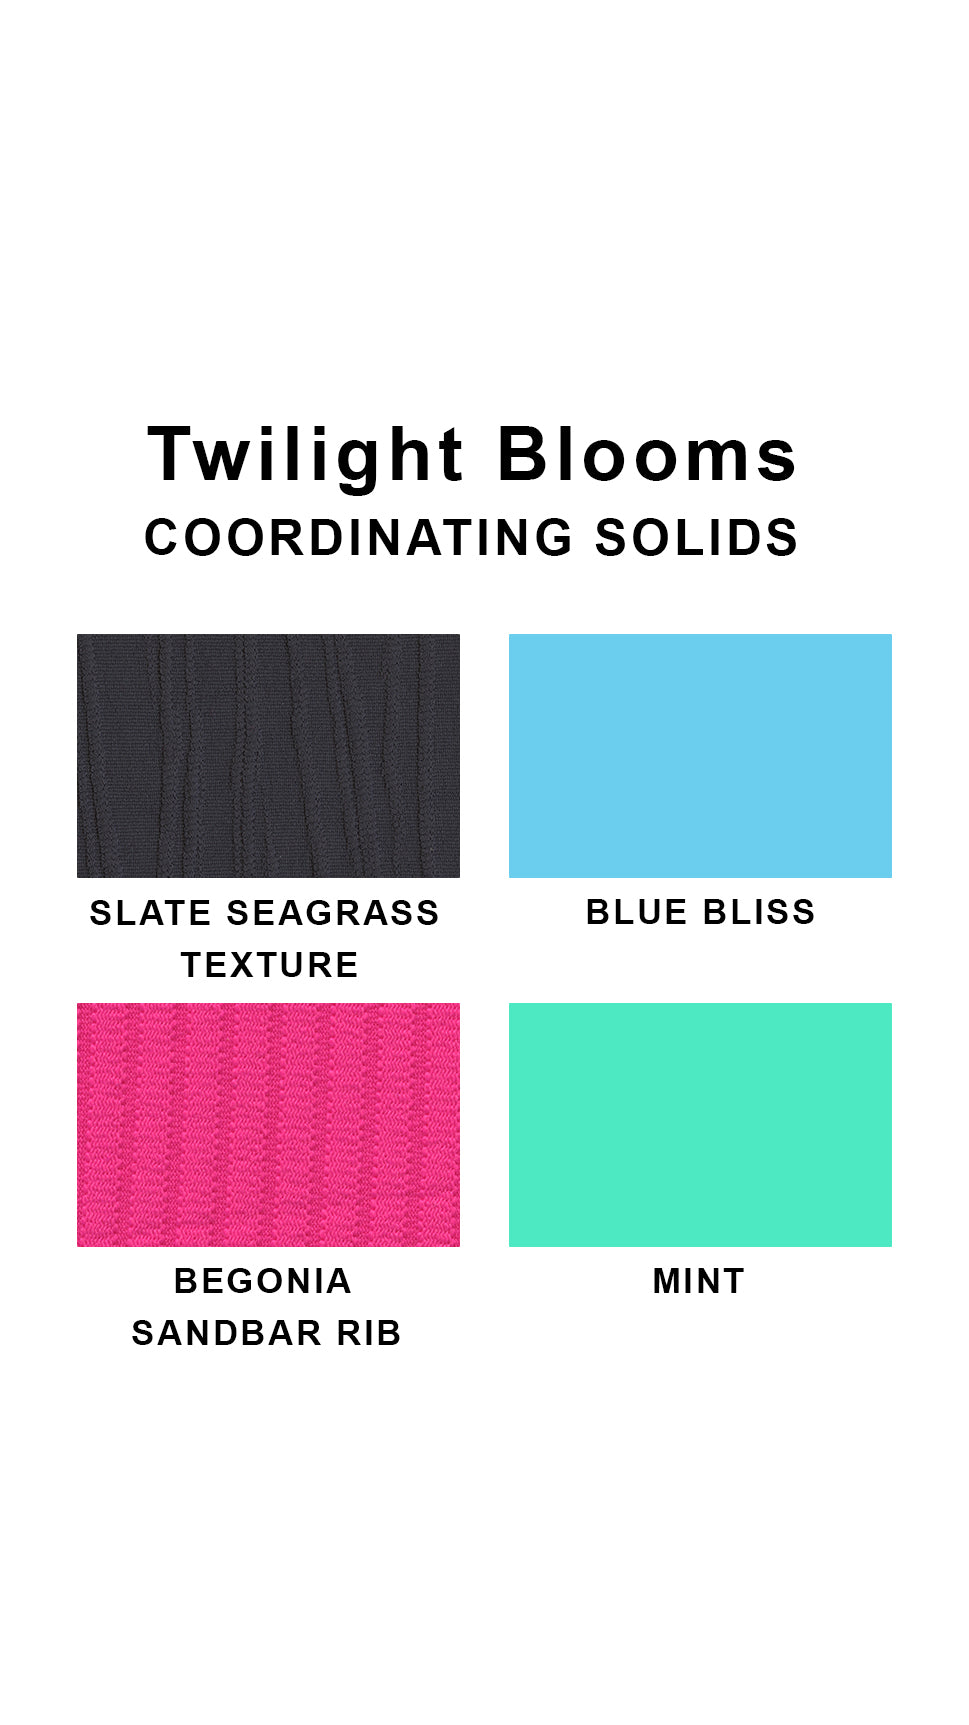 Coordinating solids chart for Twilight Blooms swimsuit print: Slate Seagrass Texture, Blue Bliss. Begonia Sandbar Rib and Mint